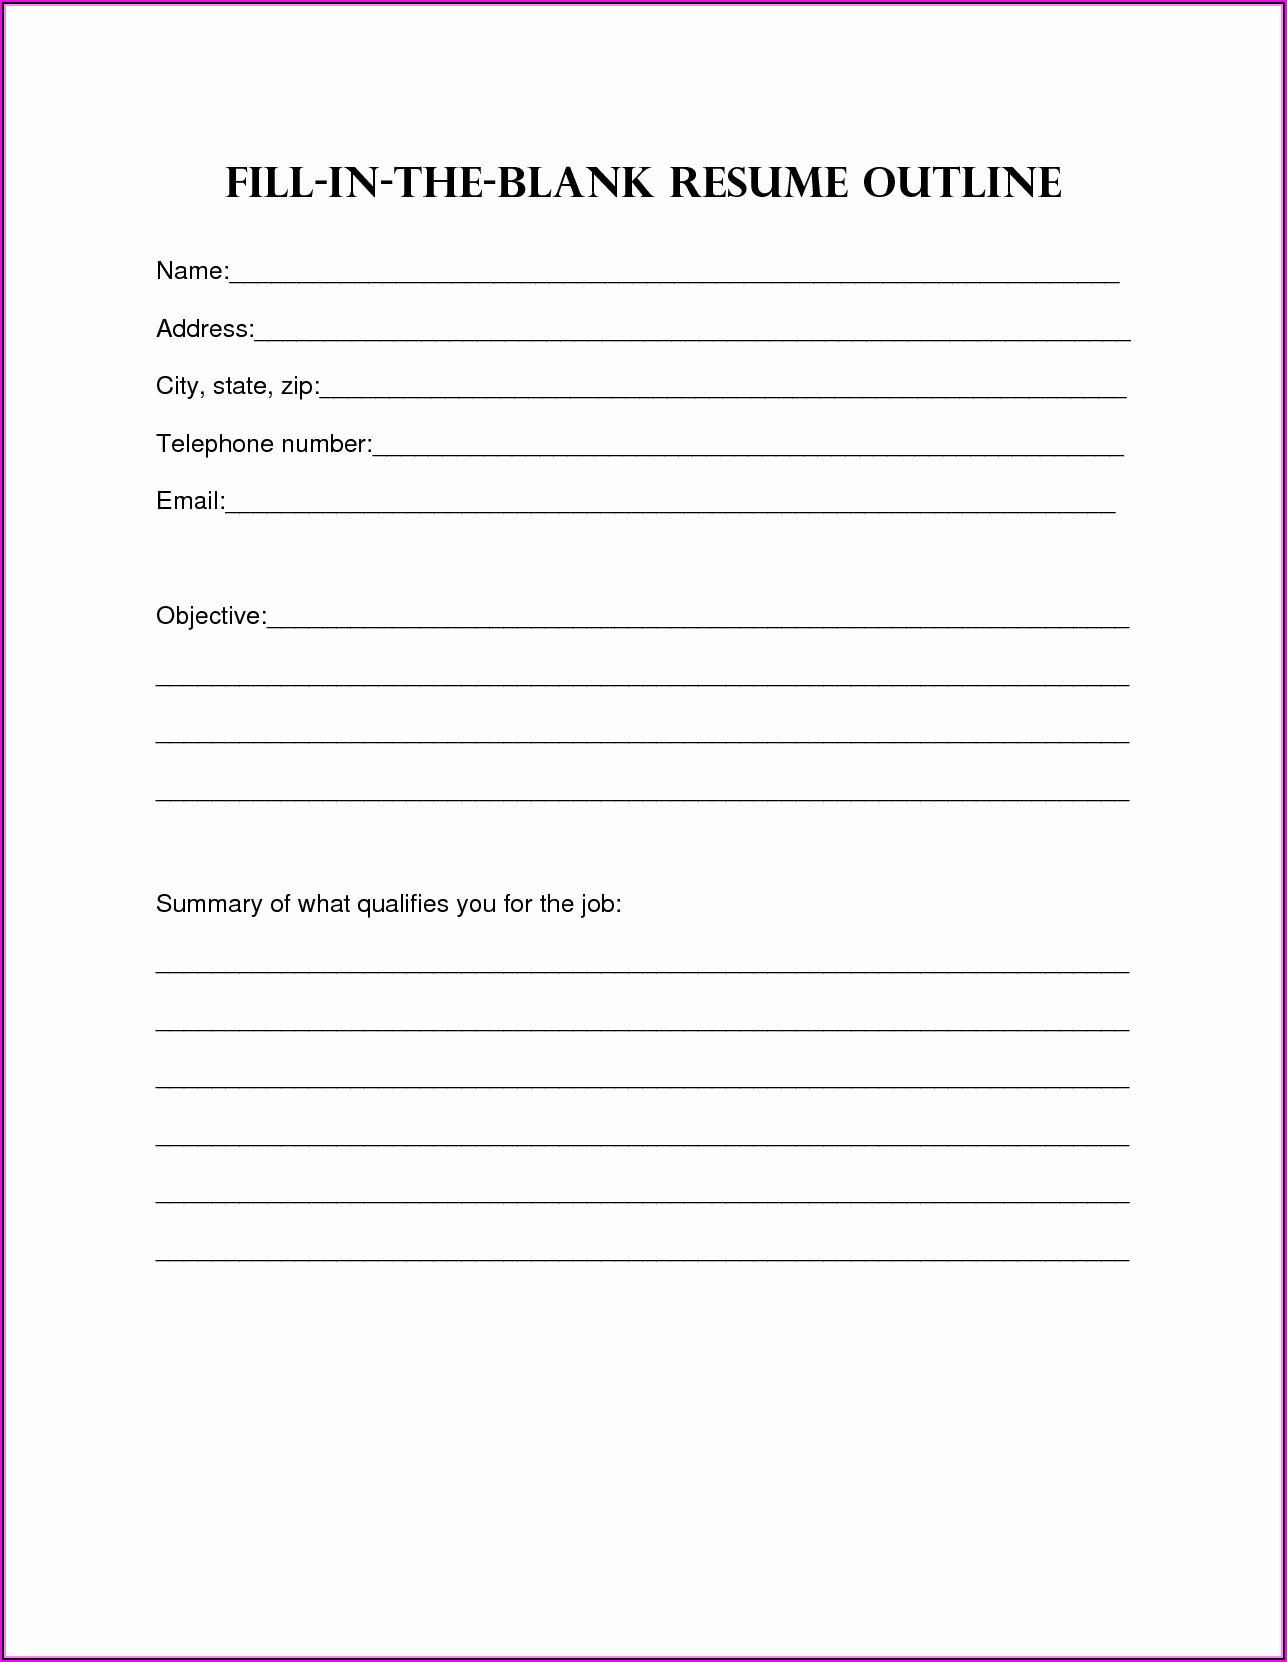 Free Resume Fill In The Blank Pdf